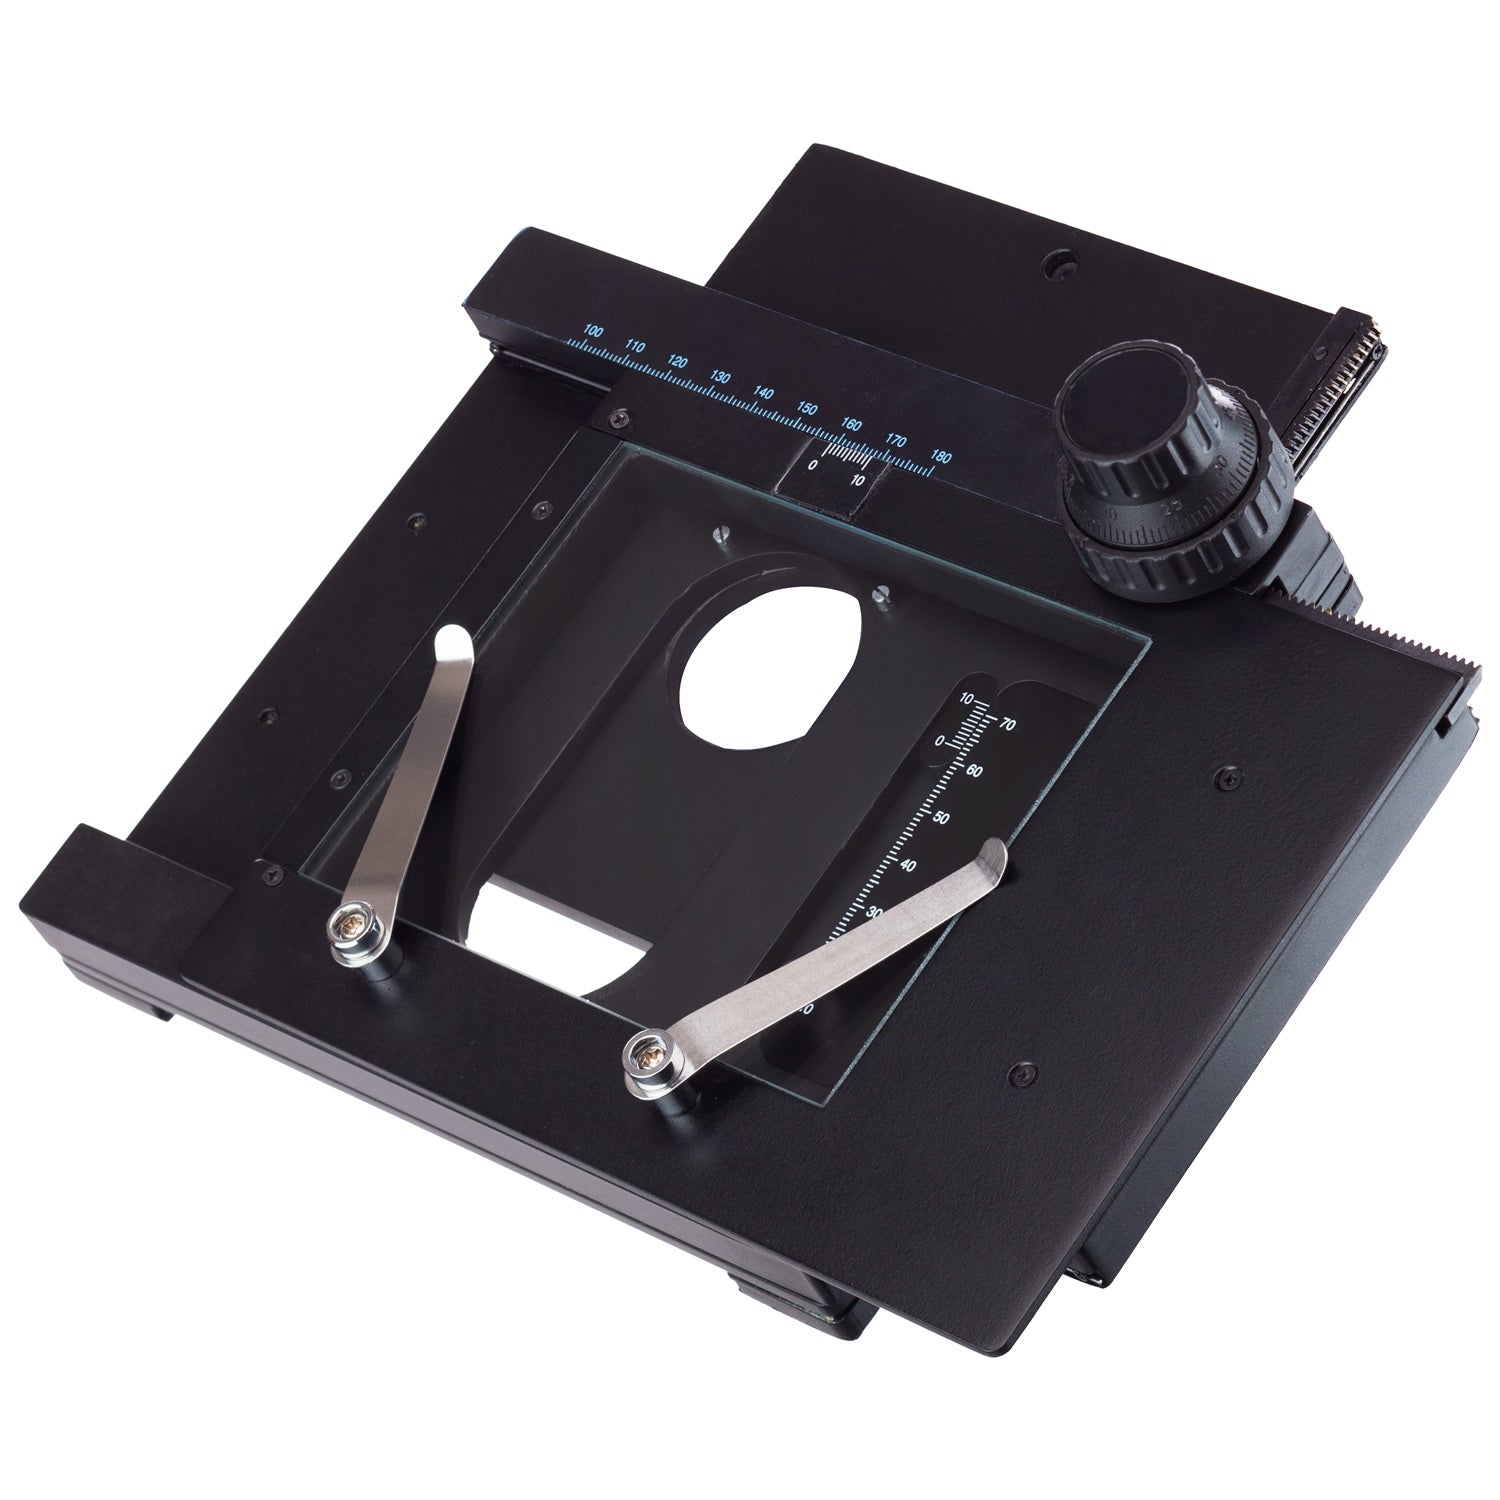 X-Y Gliding Table - Manual Stage For Microscopes – AmScope UK